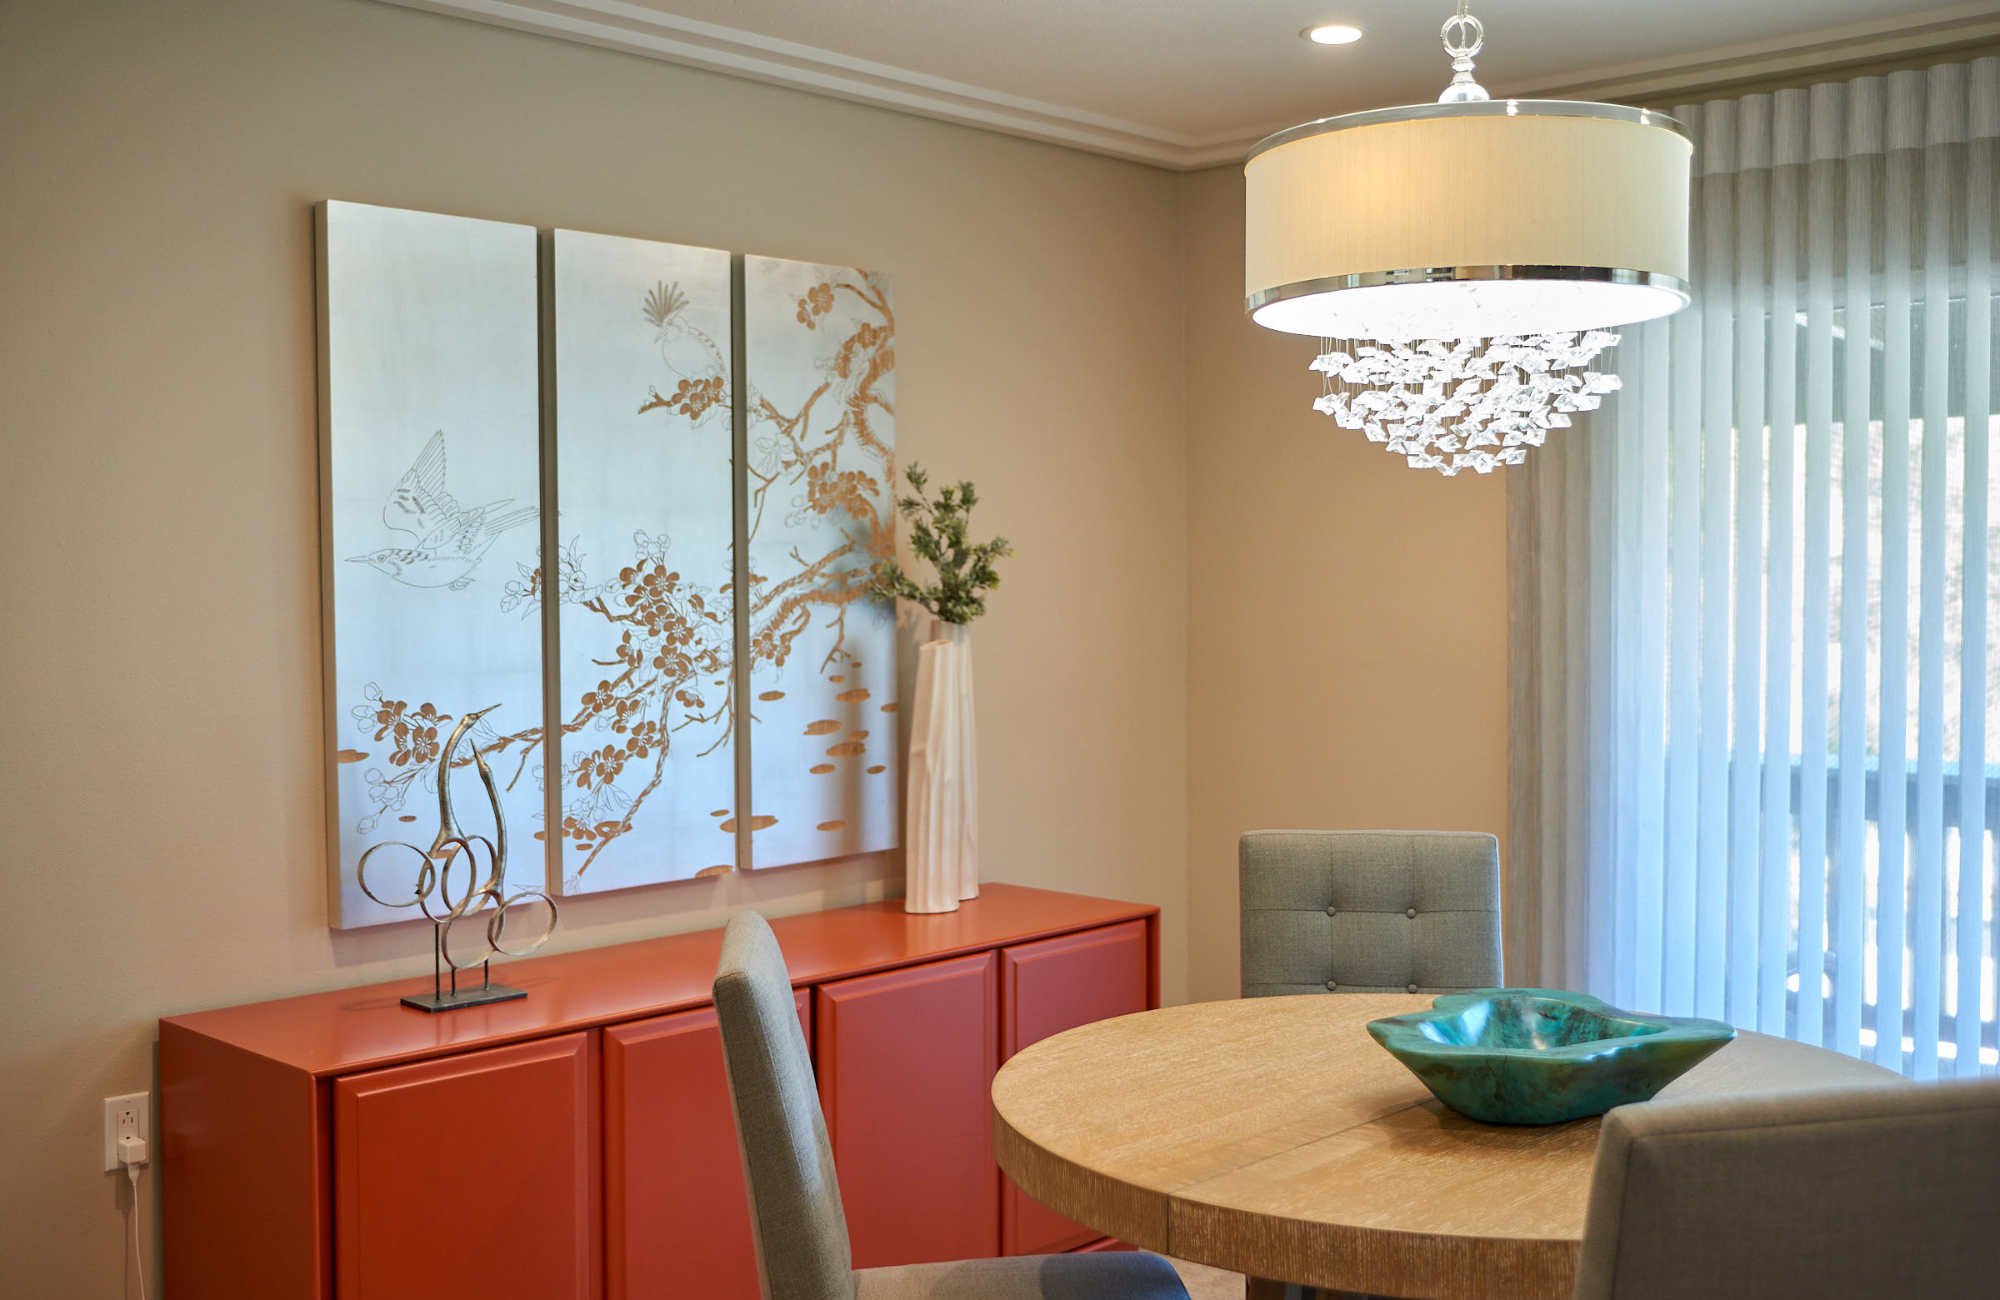 raashi-design-livermore-ca-using-color-and-light-designer-looking-home-transitional-dining-room-feng-shui-interior-design